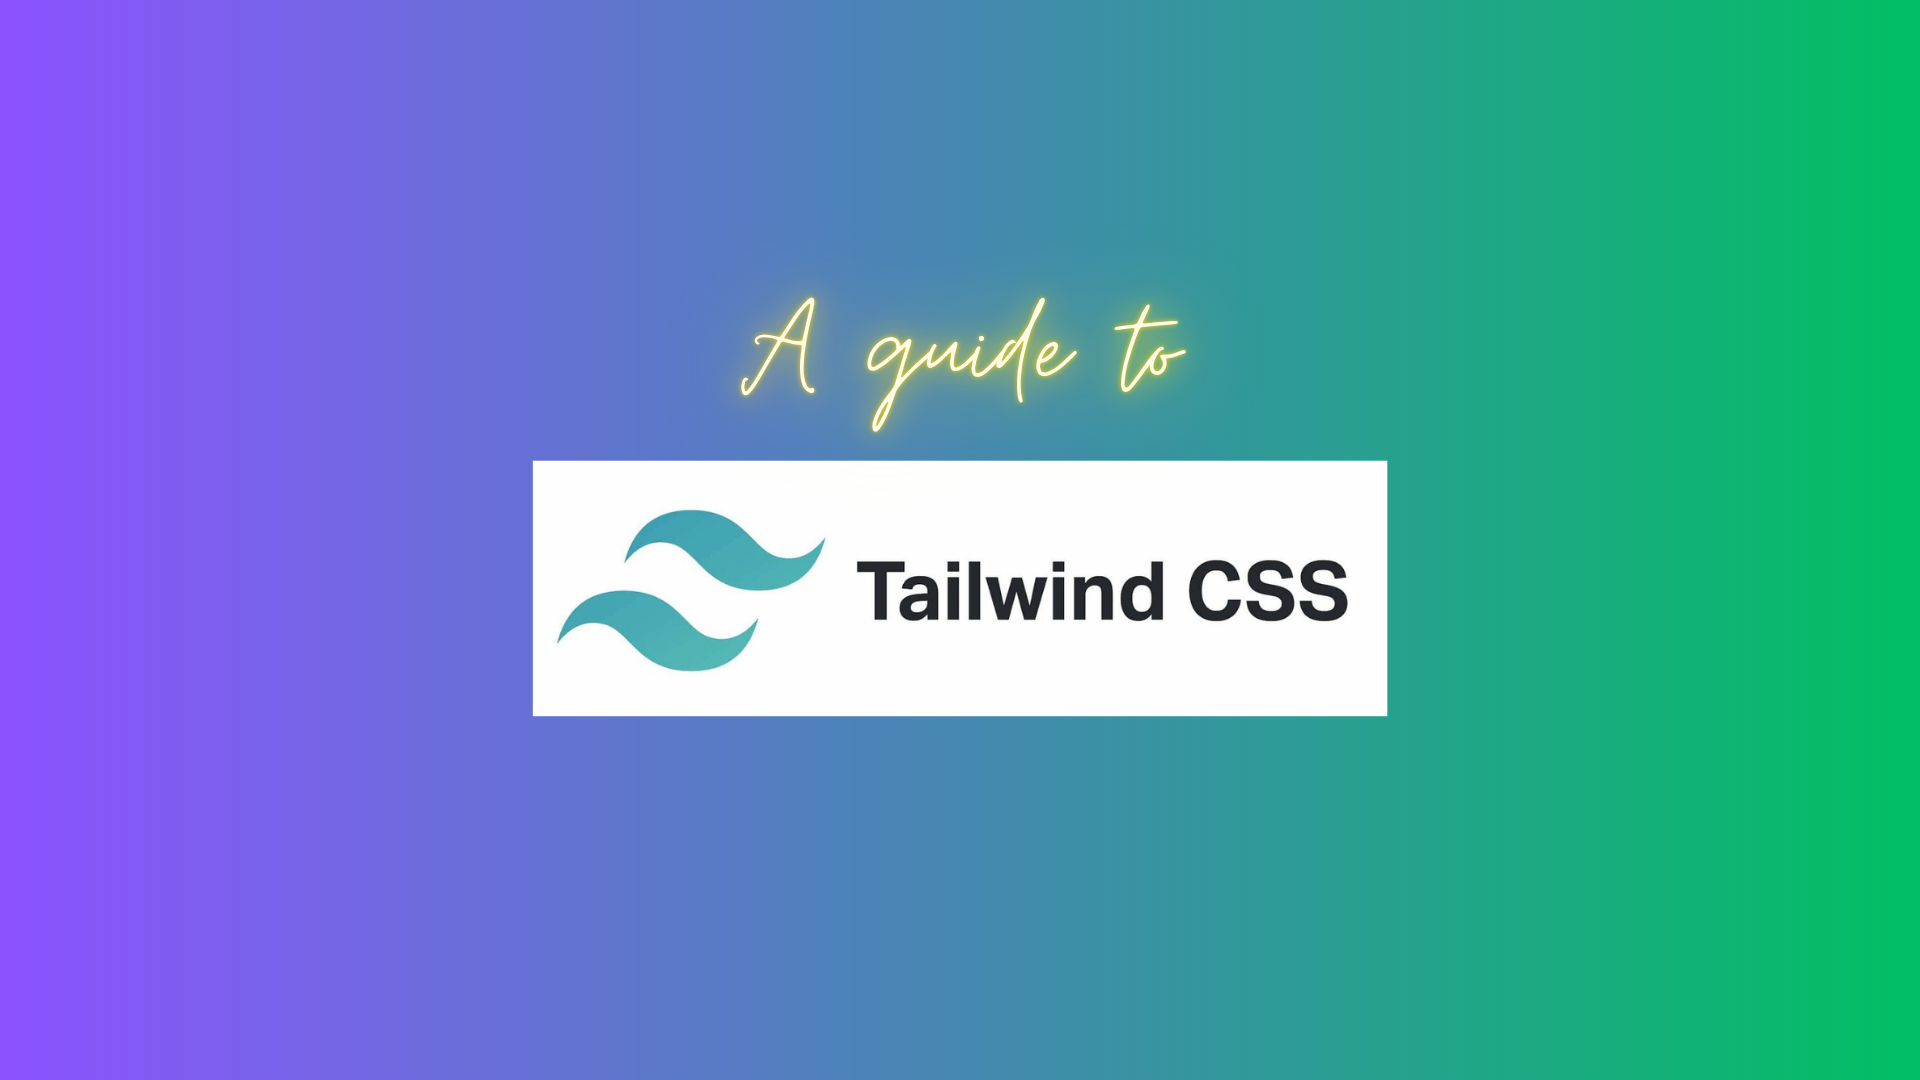 A guide to tailwind CSS with logo on a blended purple and green background